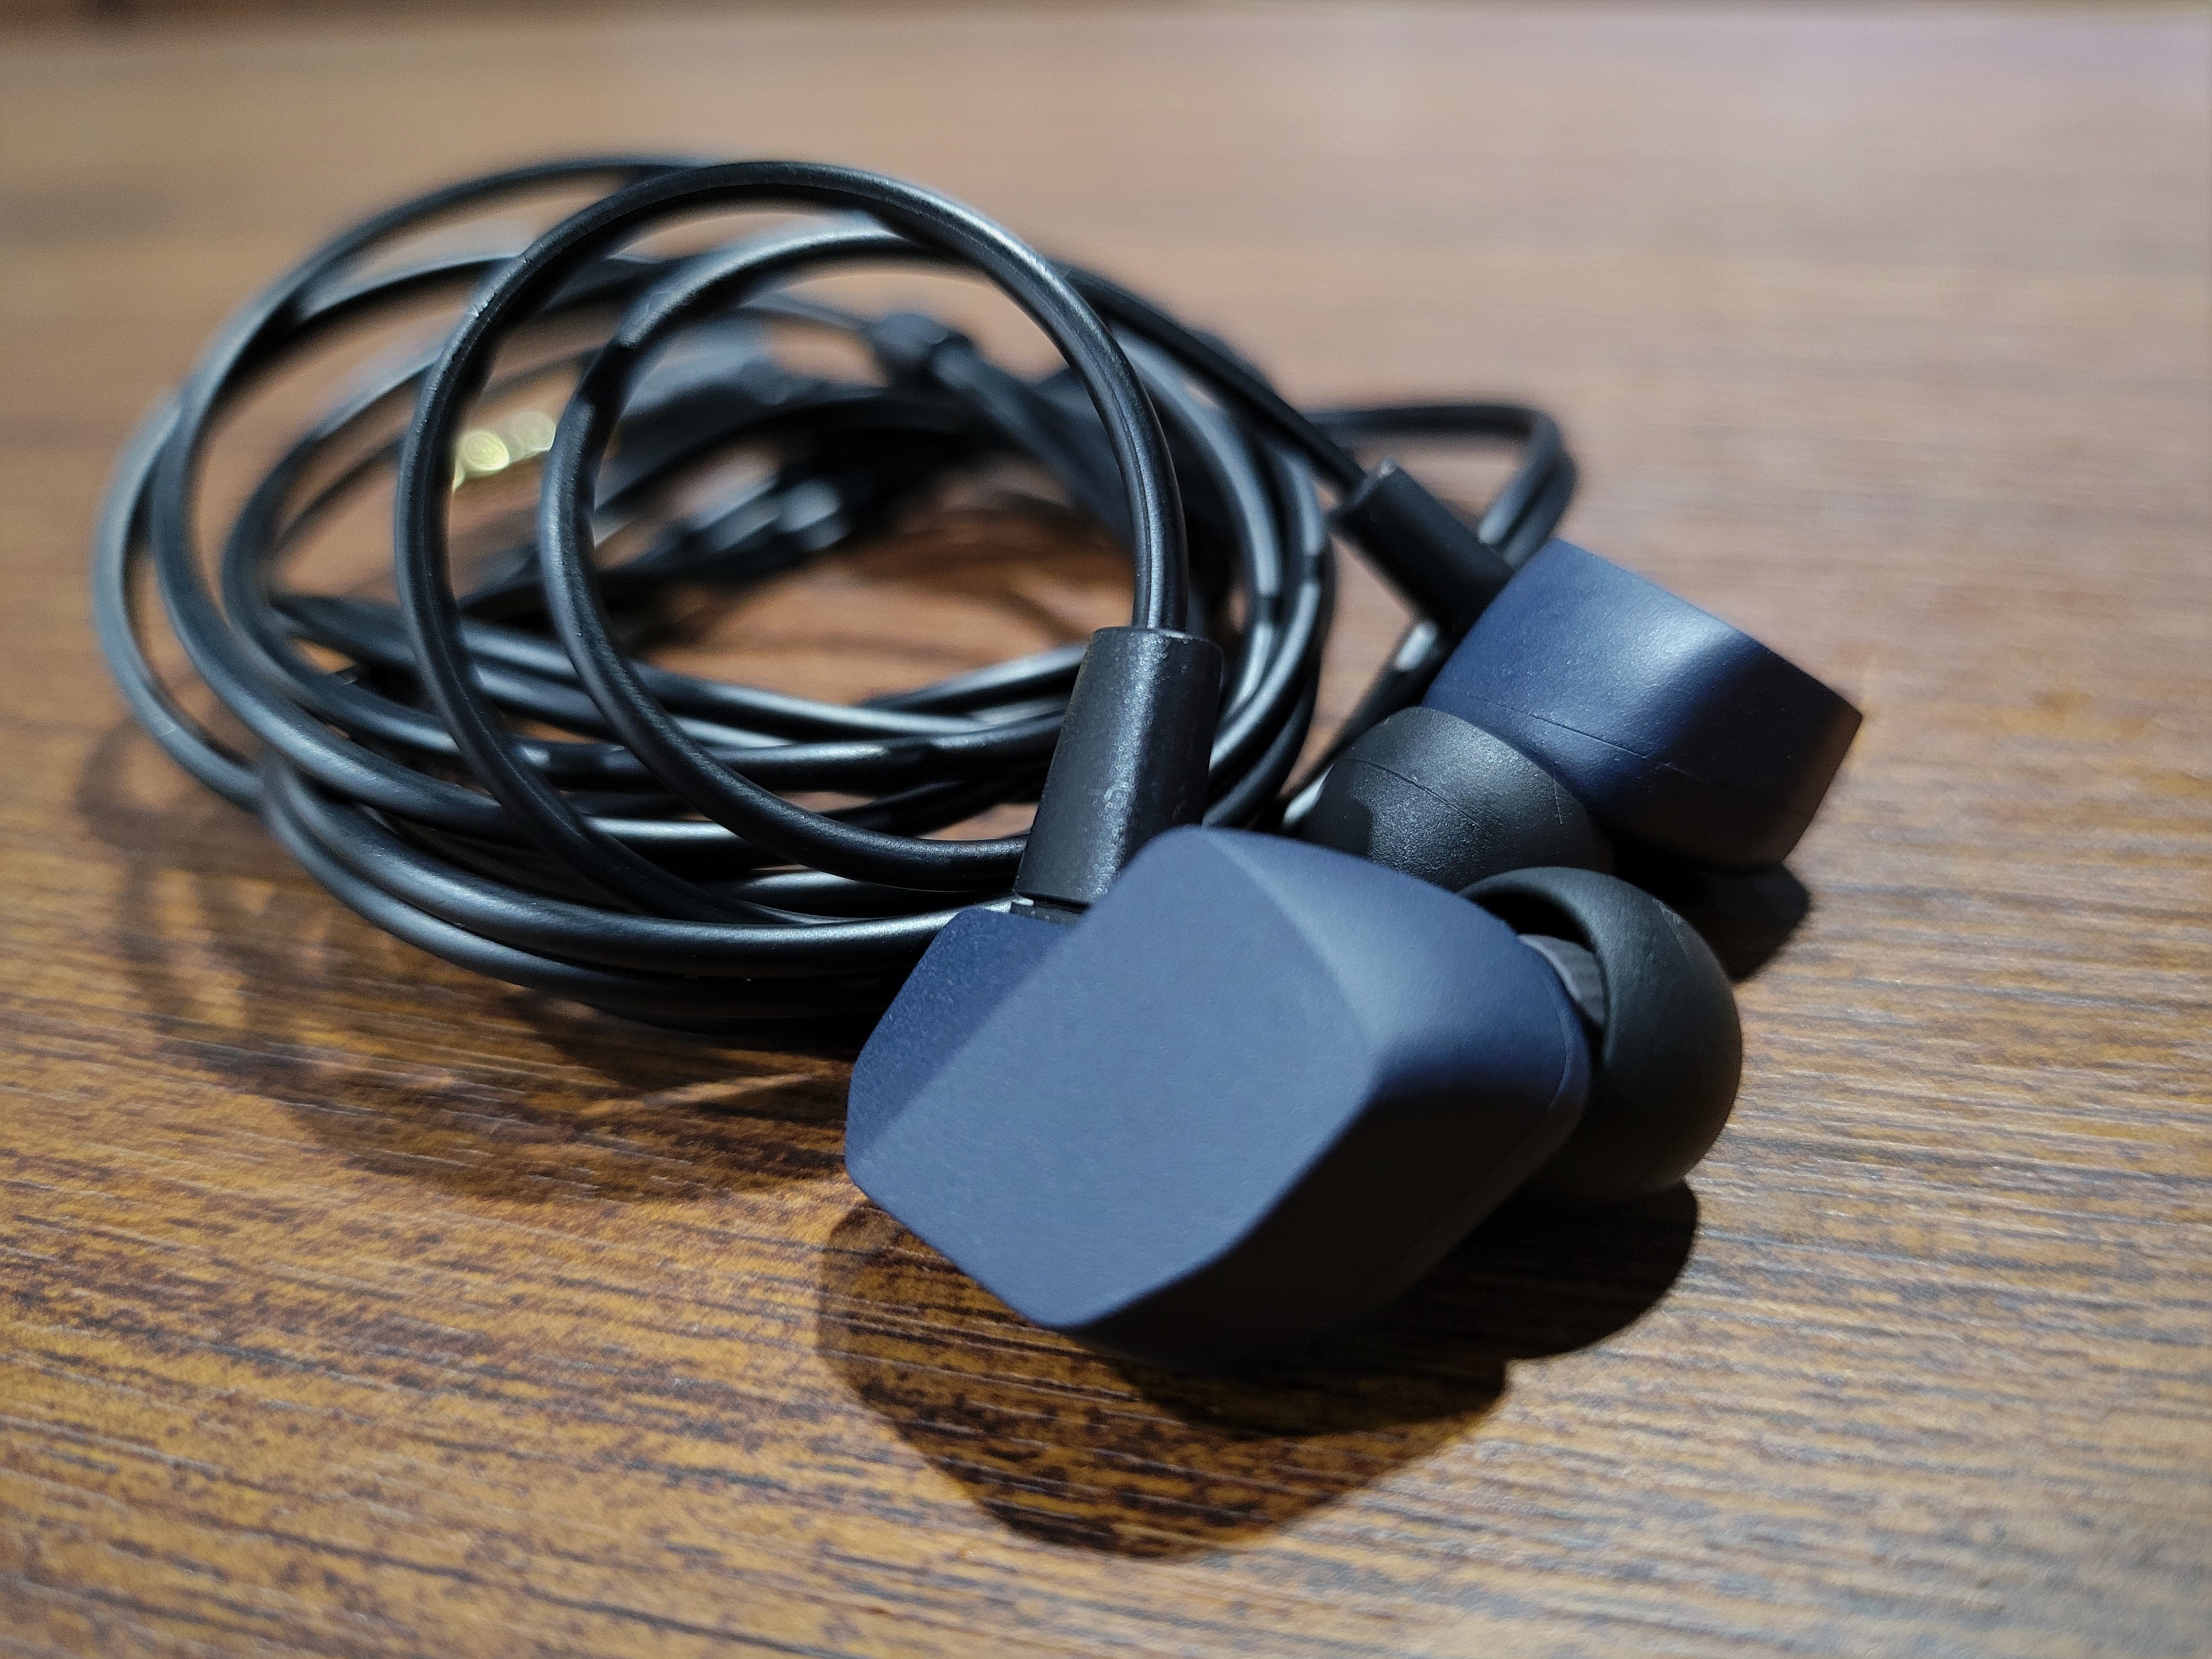 Crinnotes] Final Audio A3000 and A4000: Budget-isation – In-Ear 